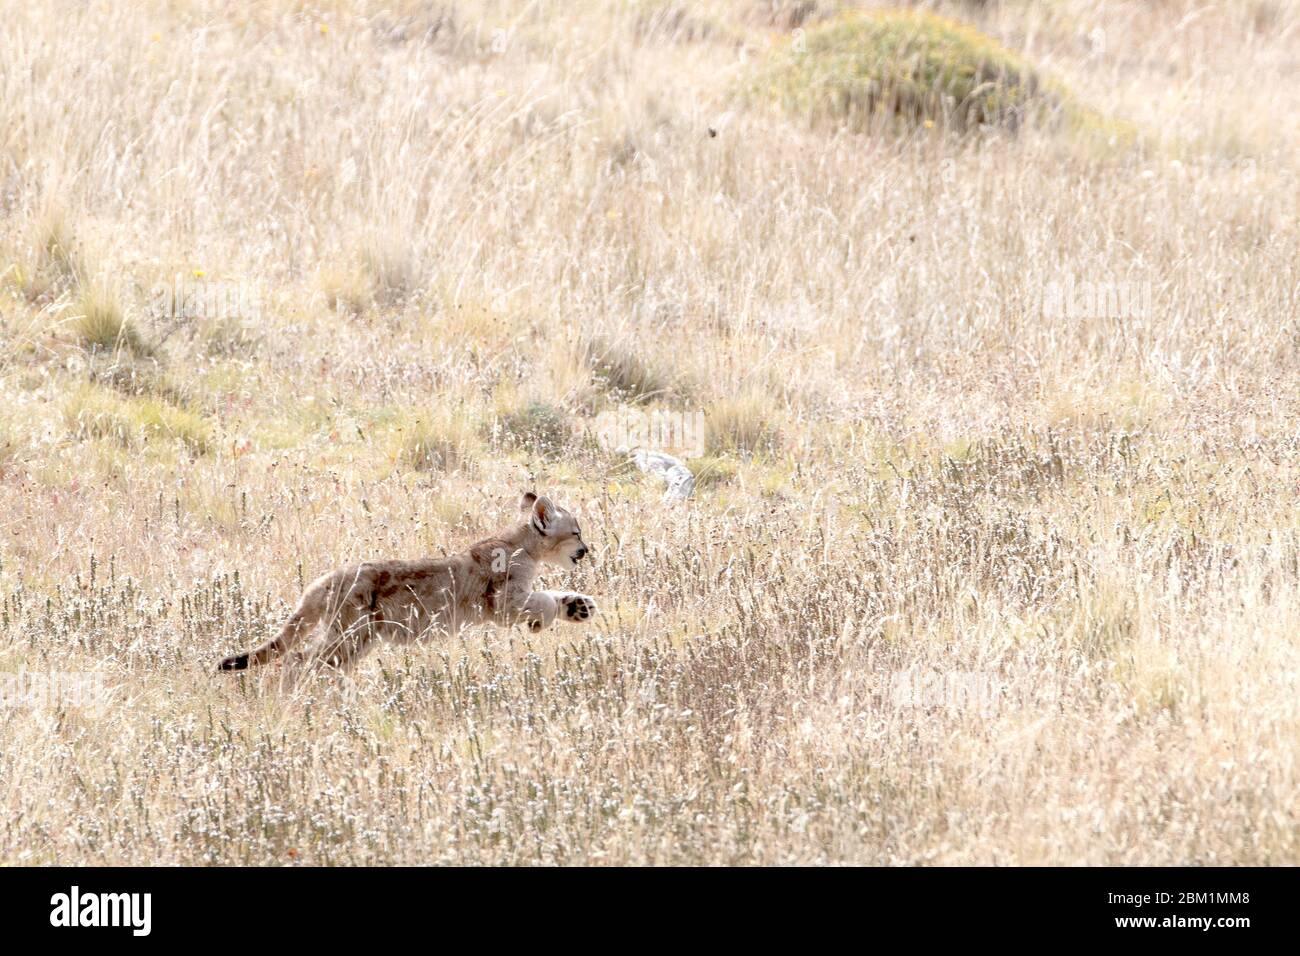 Single young puma cub on its own running through the grass on a hillside.  Also called cougar or mountain lion. Stock Photo